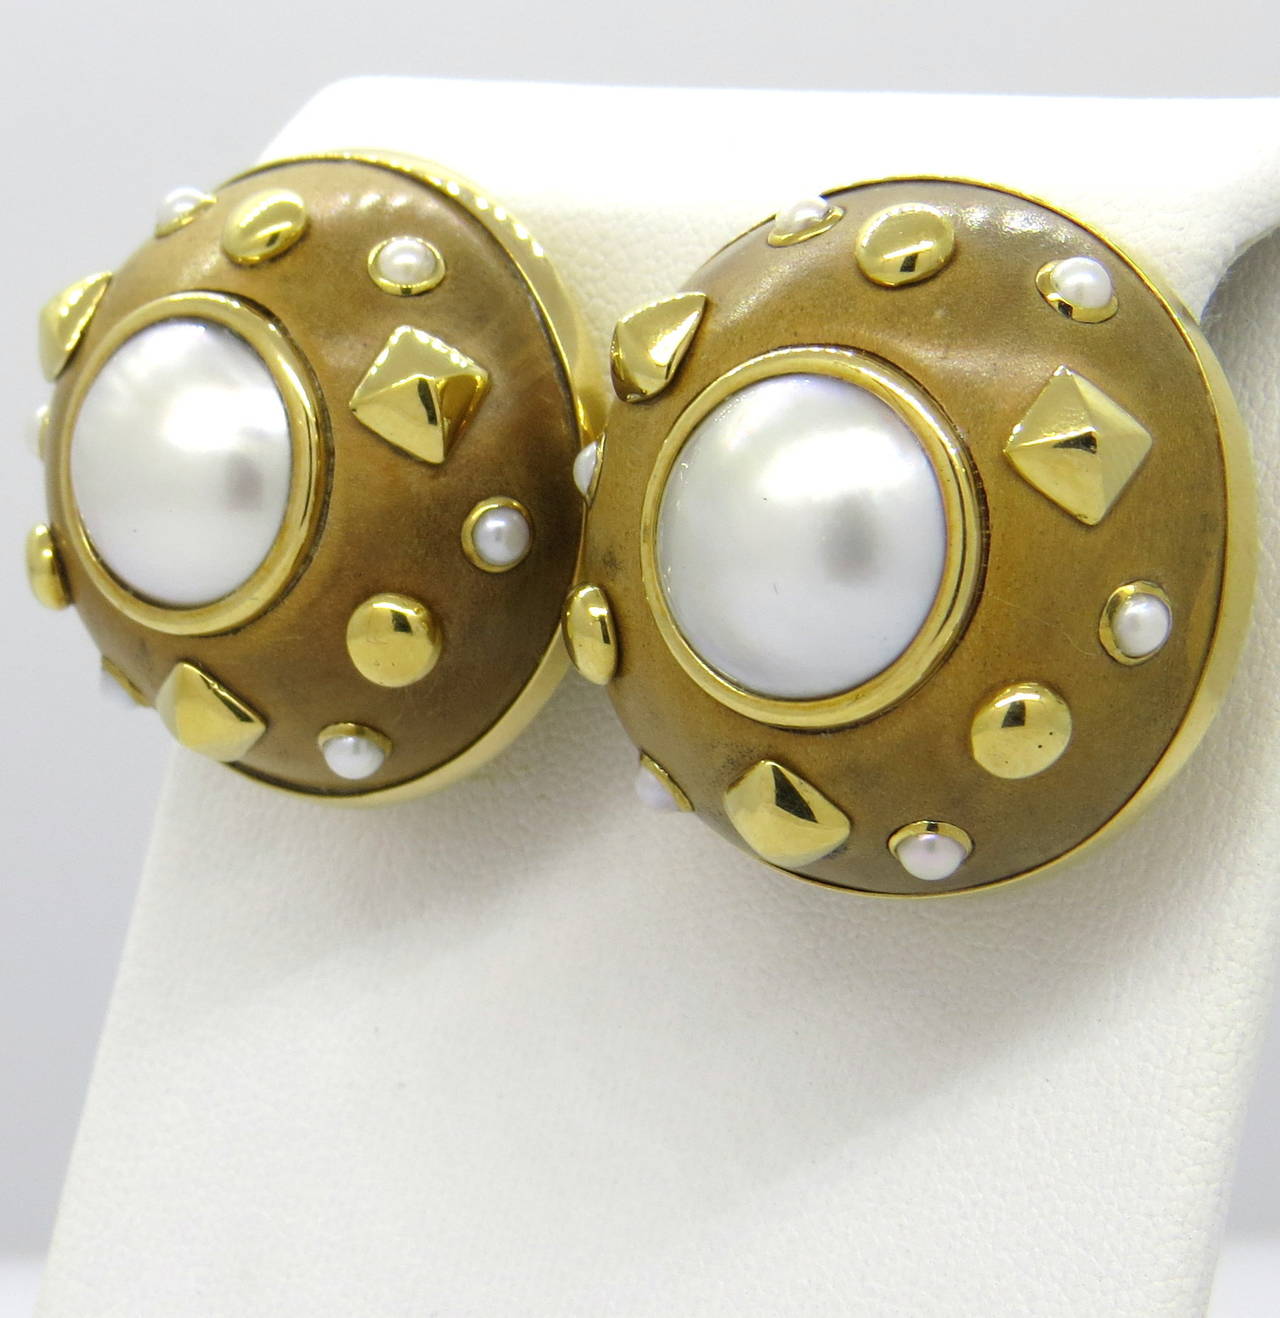 18k gold Trianon earrings, featuring wood top decorated with pearls. Earrings measure 30mm in diameter. Marked Trianon and 750. weight - 28.6gr